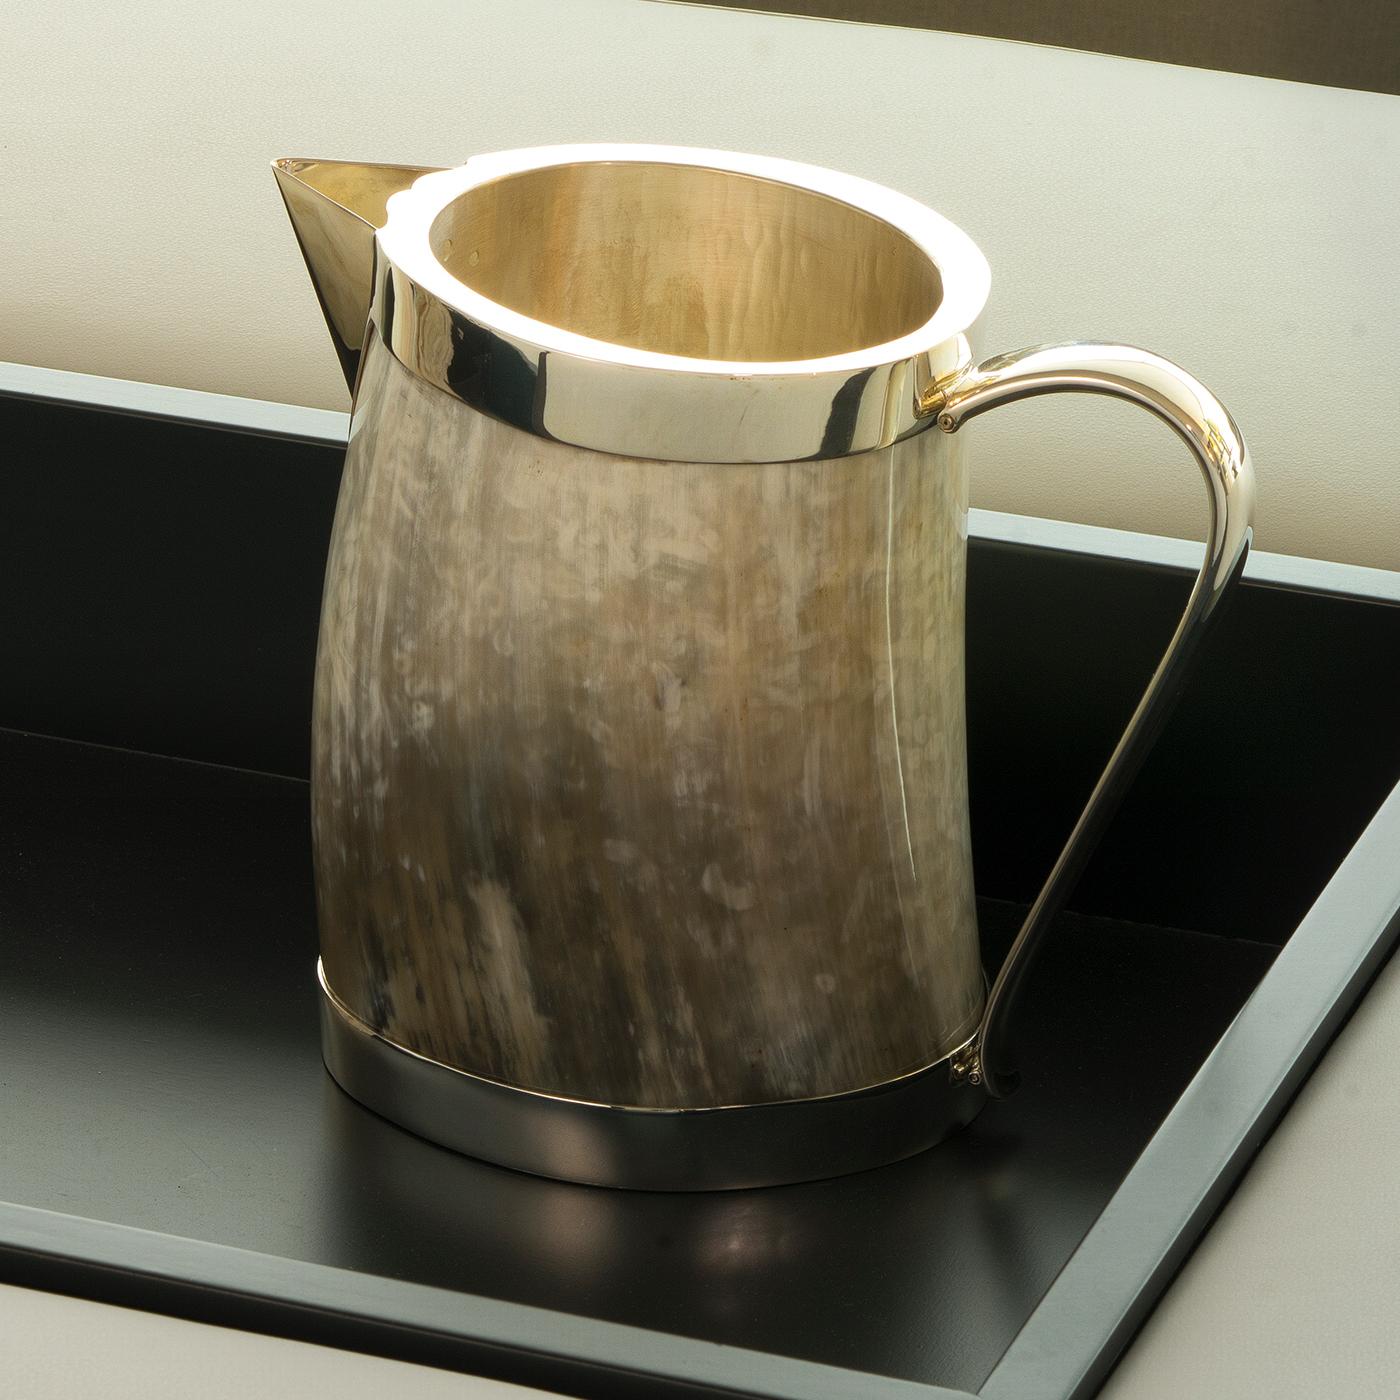 Part of the Horn collection, this superb pitcher will be the focal point of a modern table setting during formal dinners and holiday parties. Handcrafted of 925 silver, the interior has a hand-hammered surface while the sharply angled spout, the